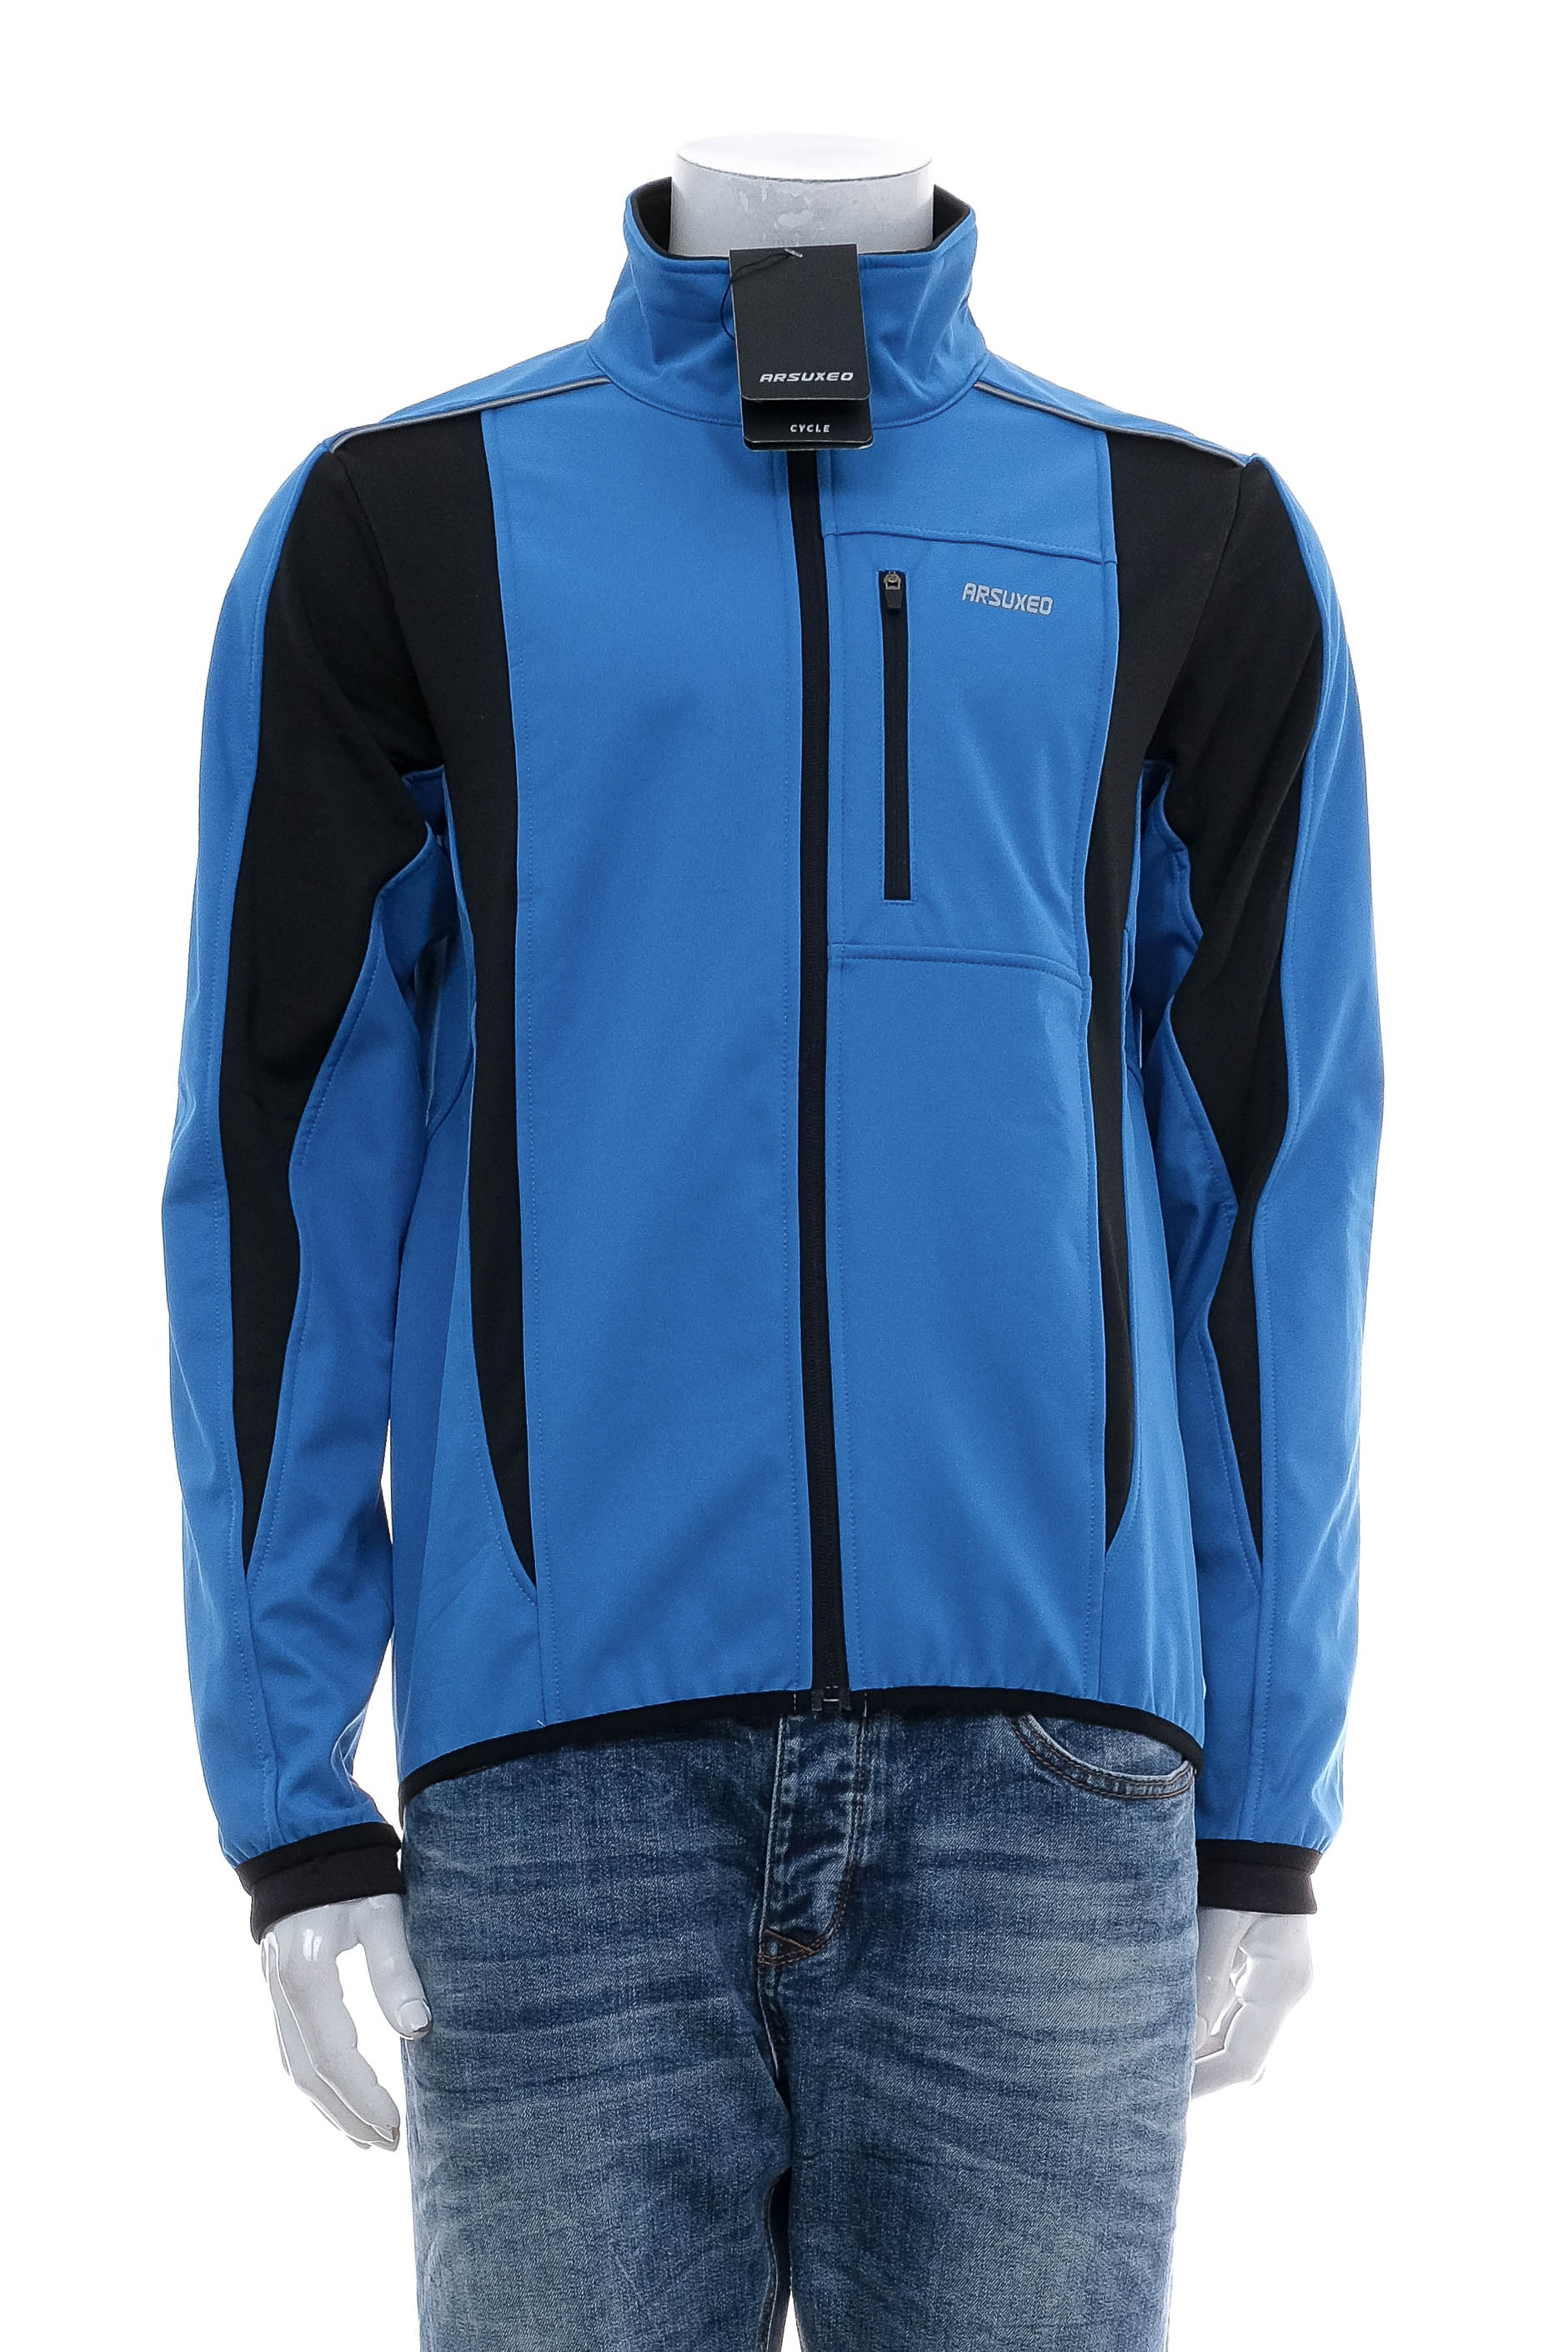 Men's jacket for cycling - ARSUXEO - 0